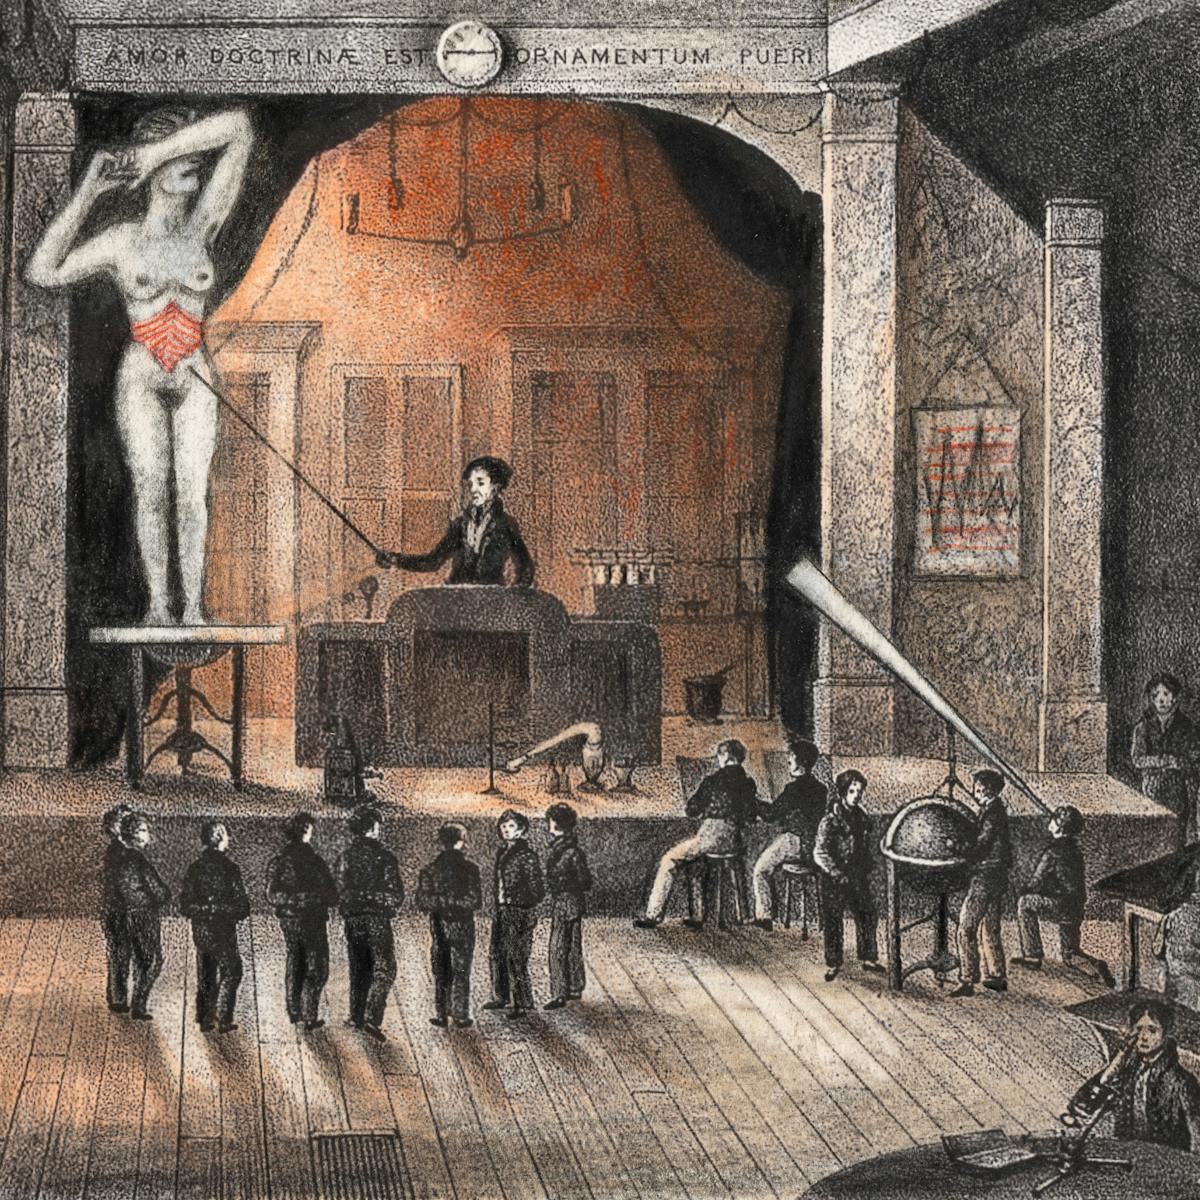 Pencil artwork drawn over a lithograph depicting a large hall with stage.  On the stage is a person standing at a lectern using a stick to point at a large (in scale) unclothed woman standing on a table with her arm covering her face.  The woman belly has been depicted as red.  At the foot of the stage is a crowd of men listening to the presentation.  There are more figures working at various desks around the large hall, including one man using a microscope, another looking through a large telescope, and two others a standing over a large globe.  Above the stage there is a clock that reads the time 14.45, and latin text that reads 'AMOR DOCTRINE EST ORNAMENTUM PUERI'.  The whole scene is black and white with exception of the light being emitted from behind the stage, and the belly of the woman which are shades of orange and red.